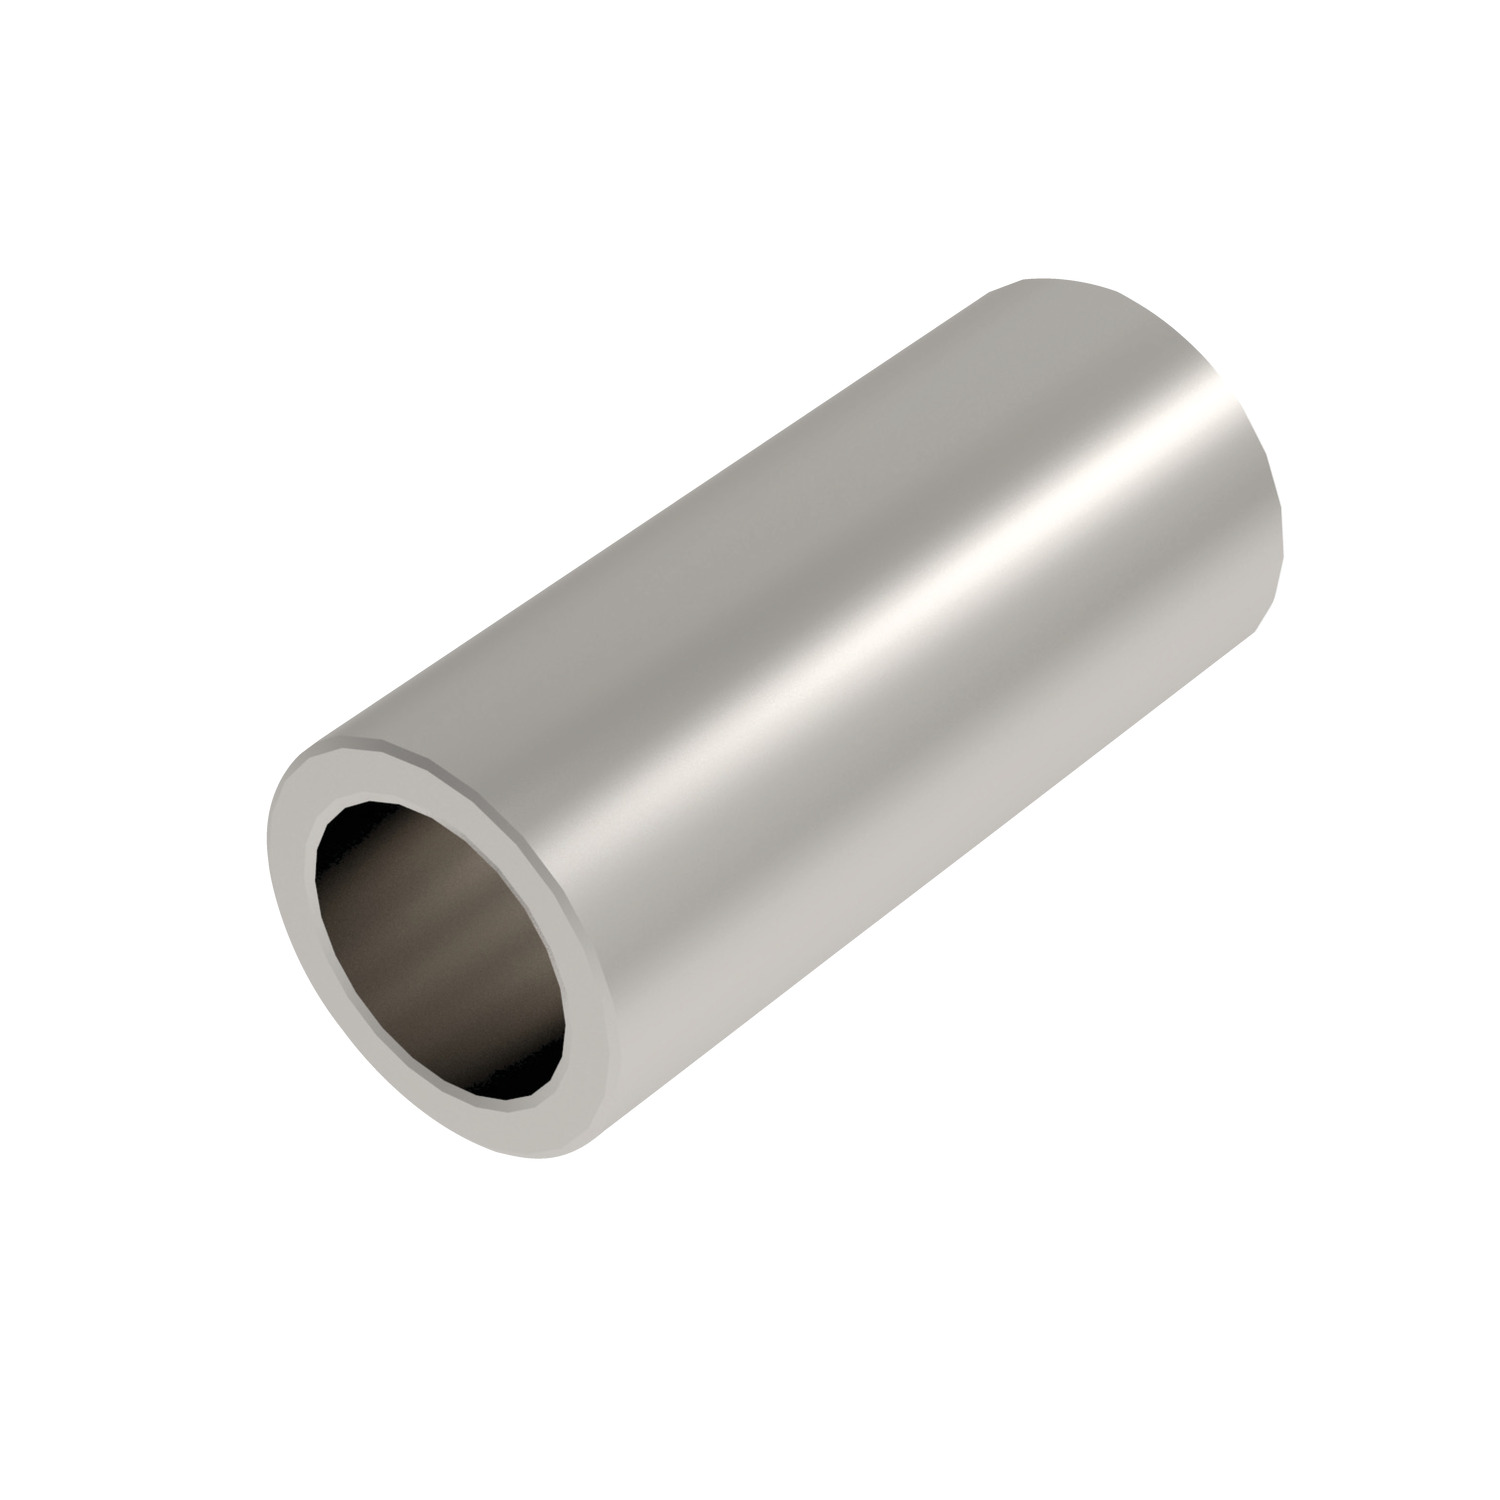 P1331 - Cylindrical Spacers - Stainless